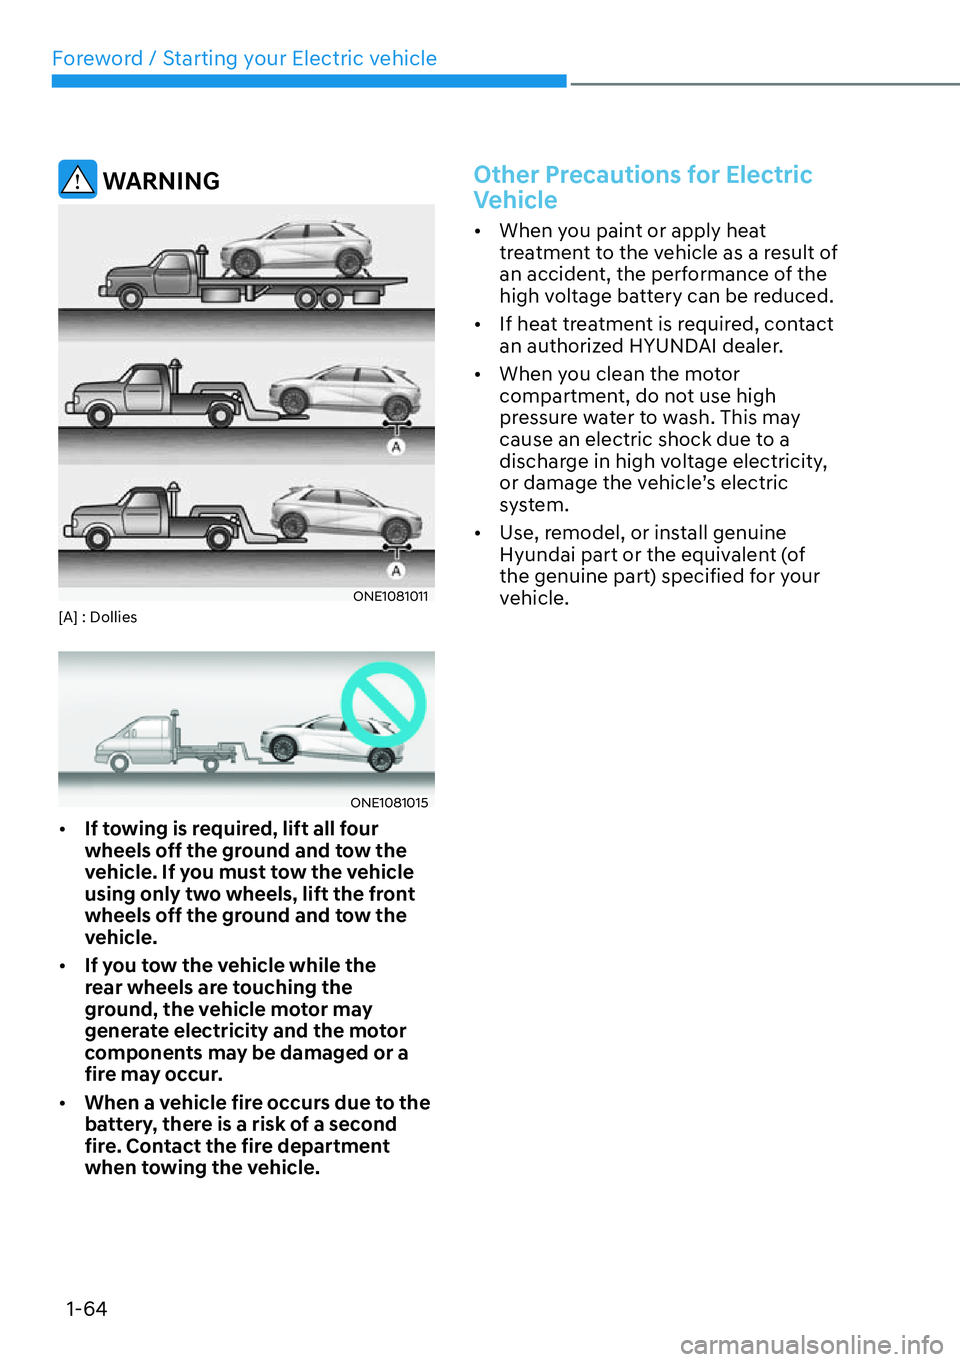 HYUNDAI IONIQ 5 2022  Owners Manual Foreword / Starting your Electric vehicle
1-64
 WARNING
ONE1081011[A] : Dollies
ONE1081015
[�If towing is required, lift all four 
wheels off the ground and tow the 
vehicle. If you must tow the veh